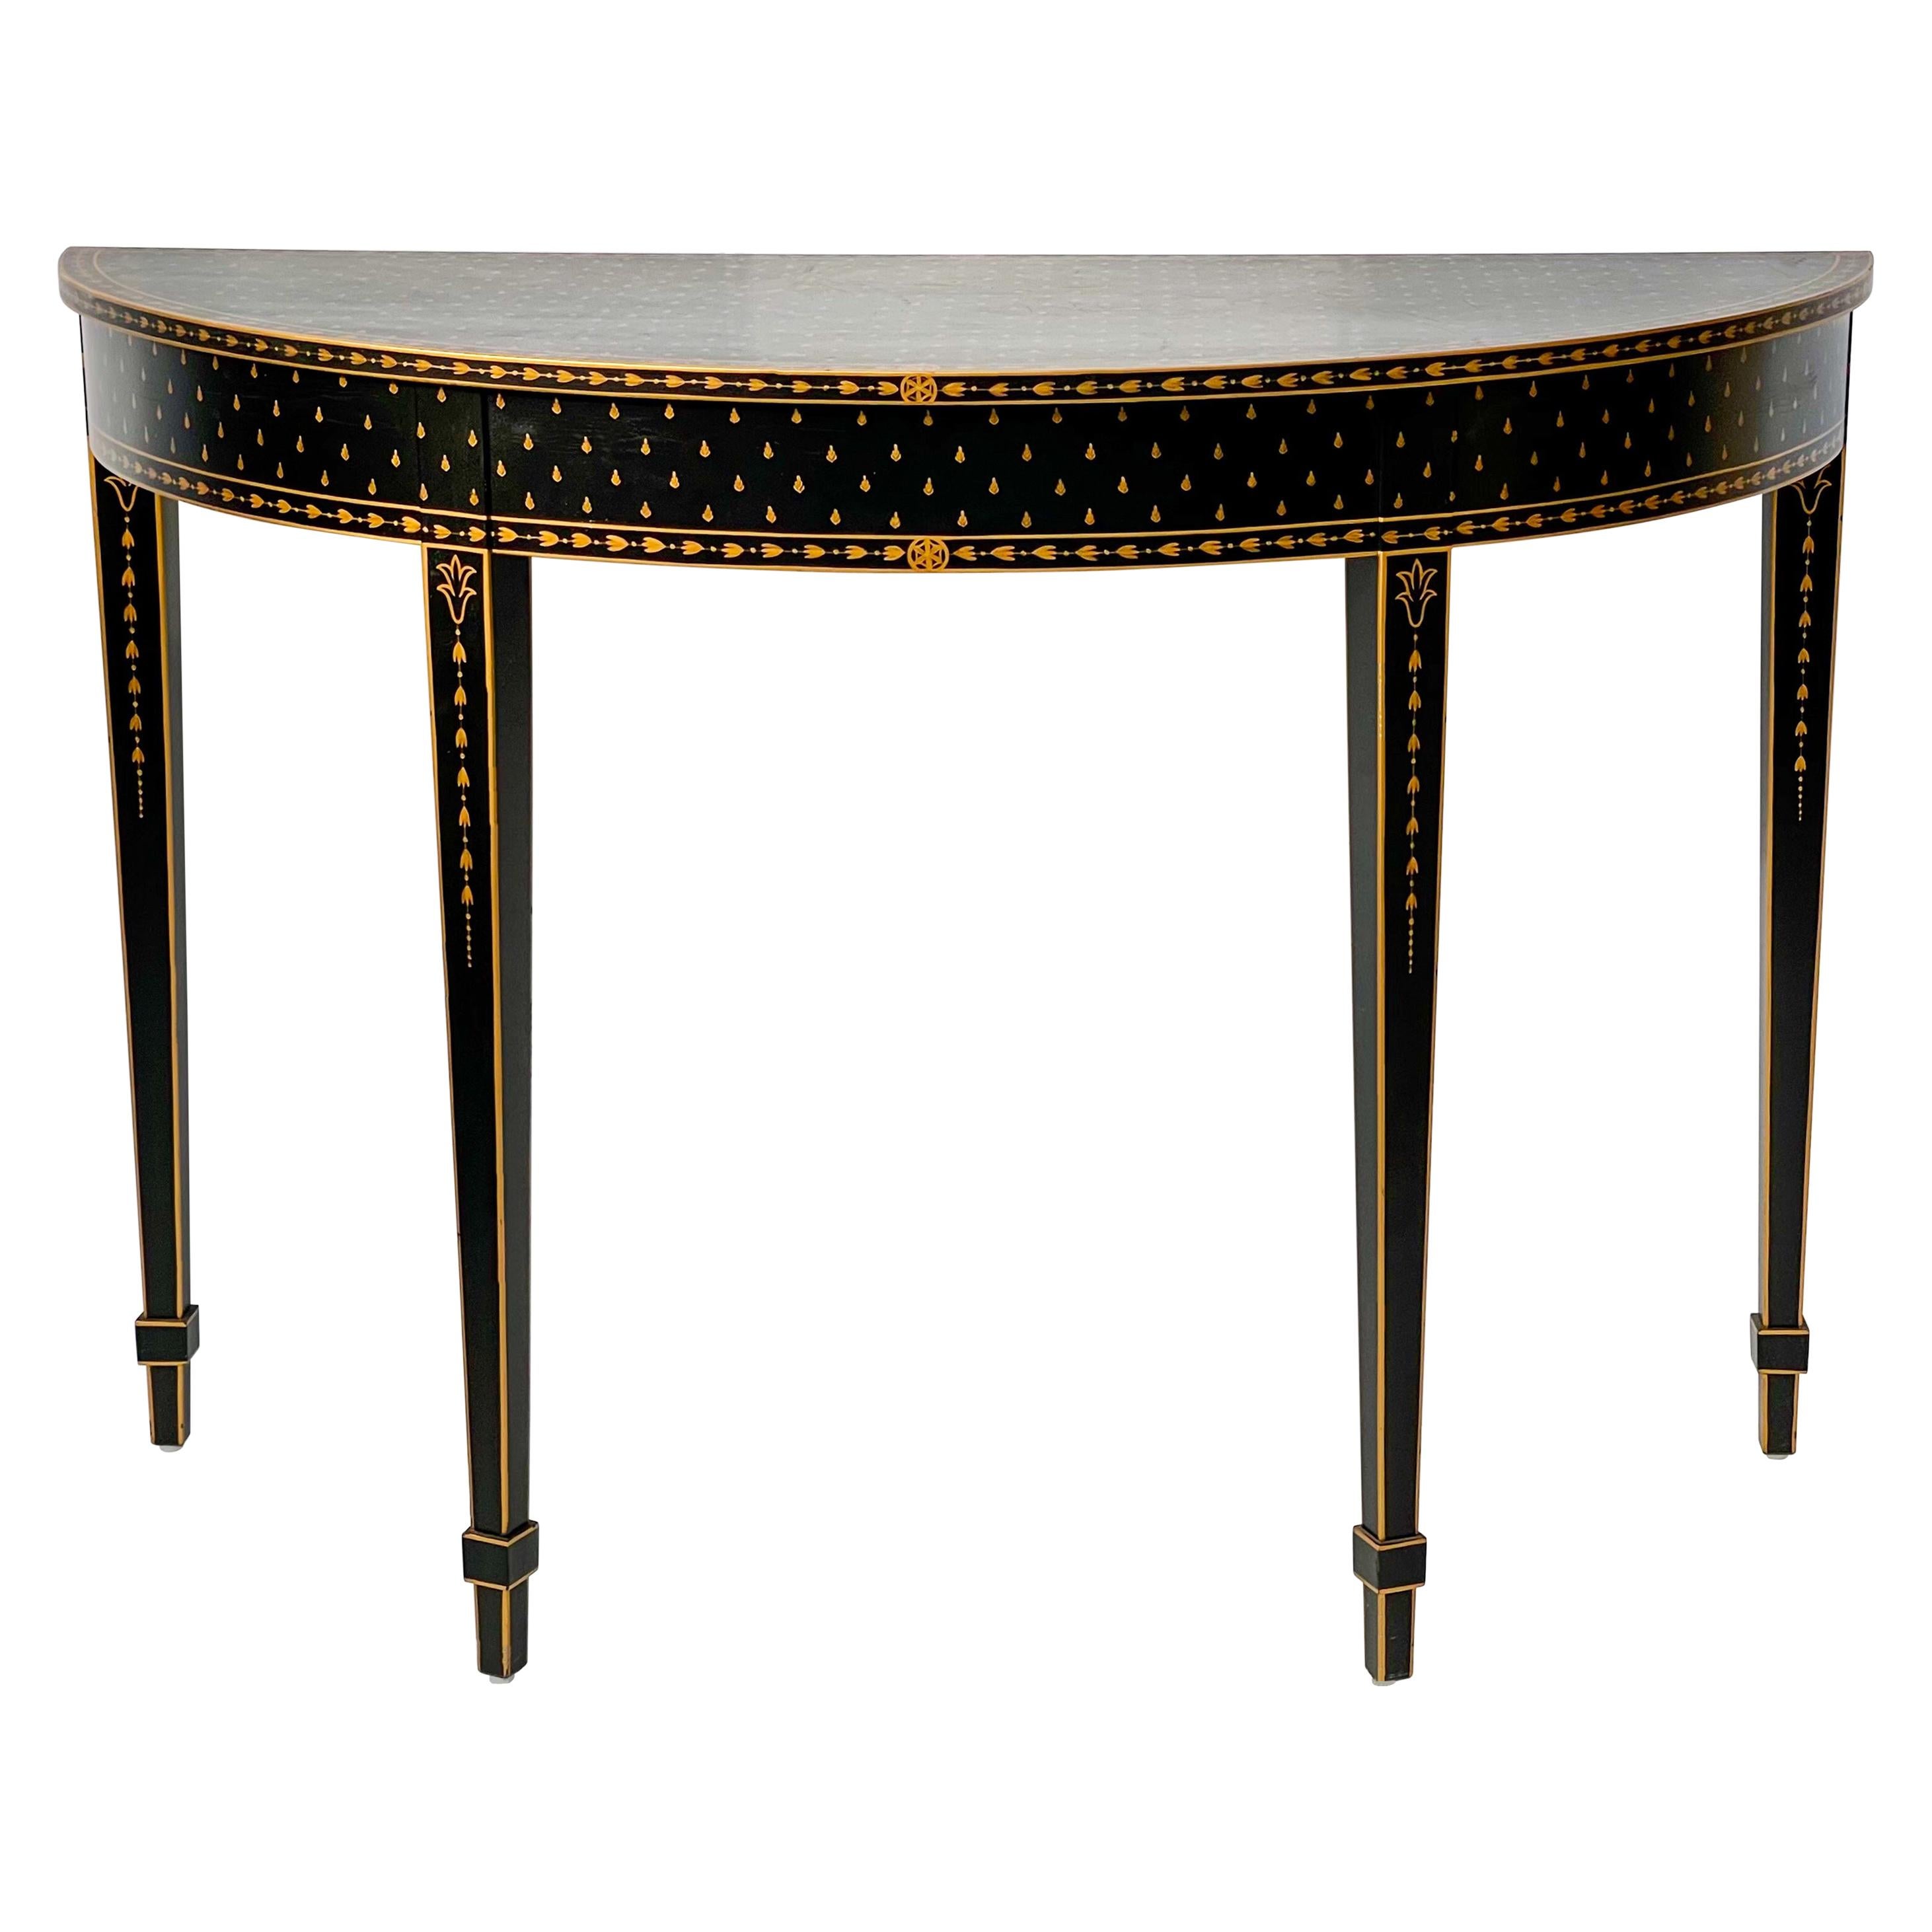 Regency Style Ebonized and Gilt Painted Console Table by Chelsea House